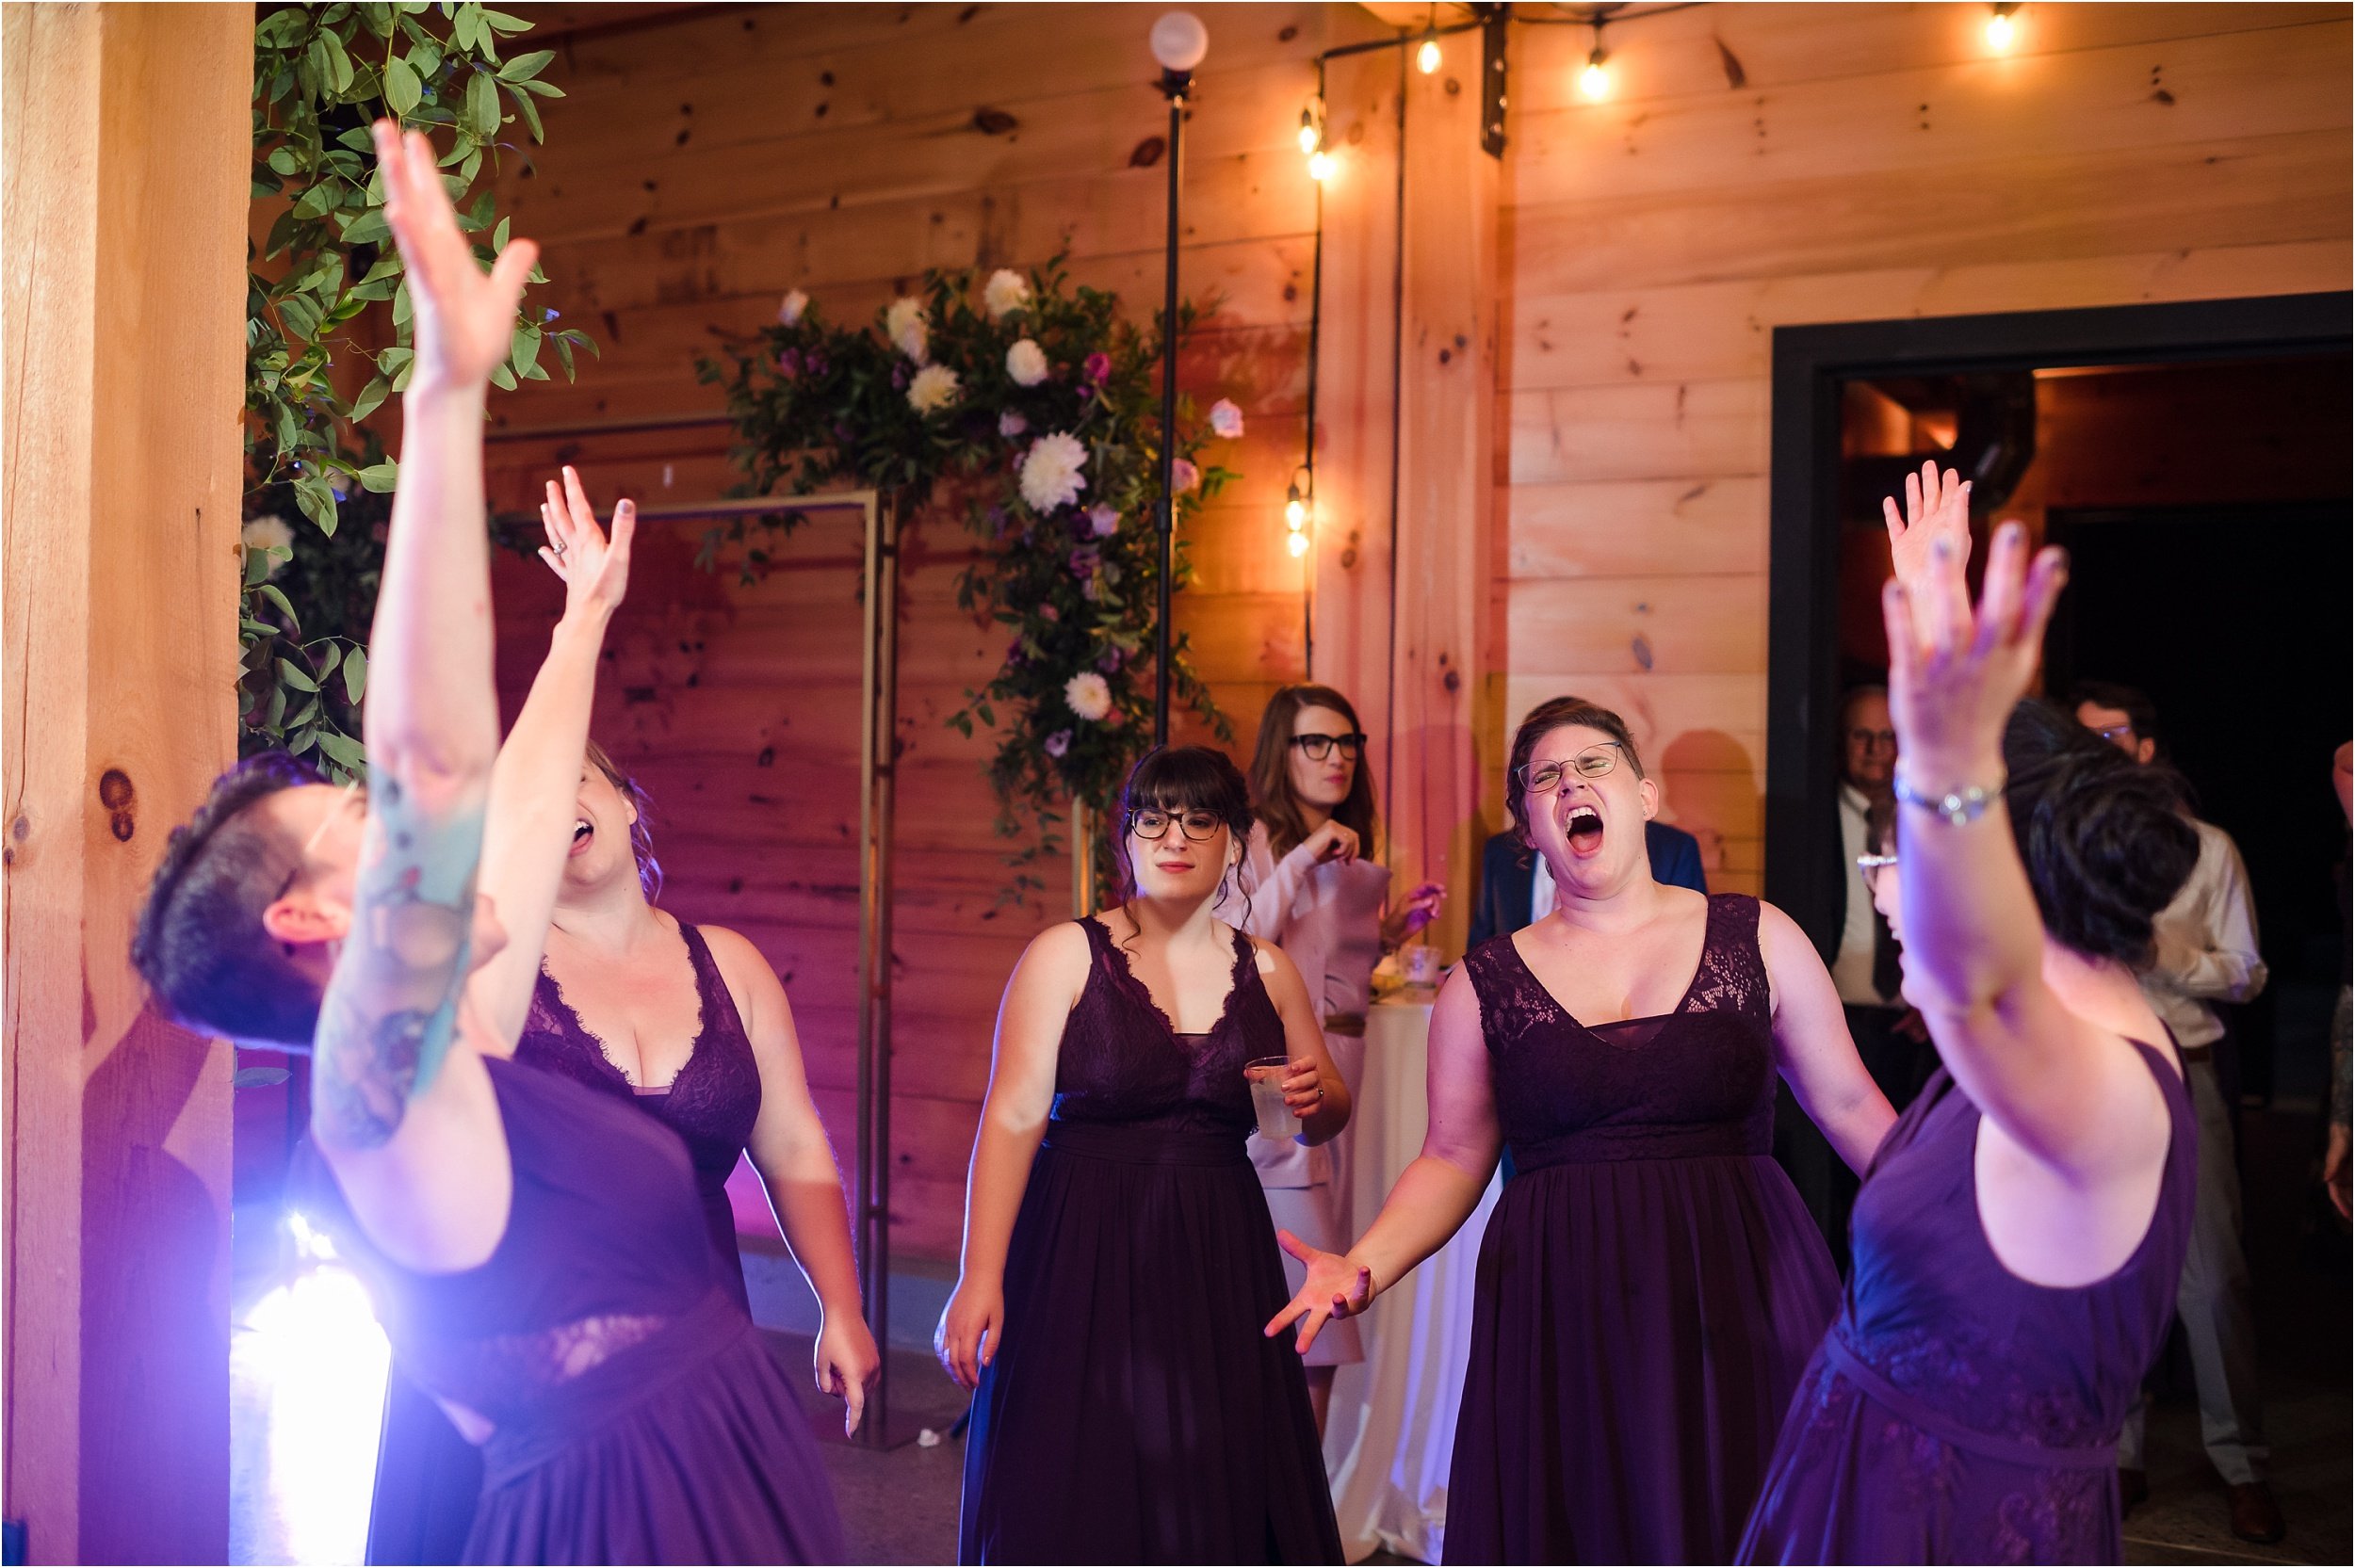  Bridesmaids singing along to a popular song during the dance party at a wedding.  